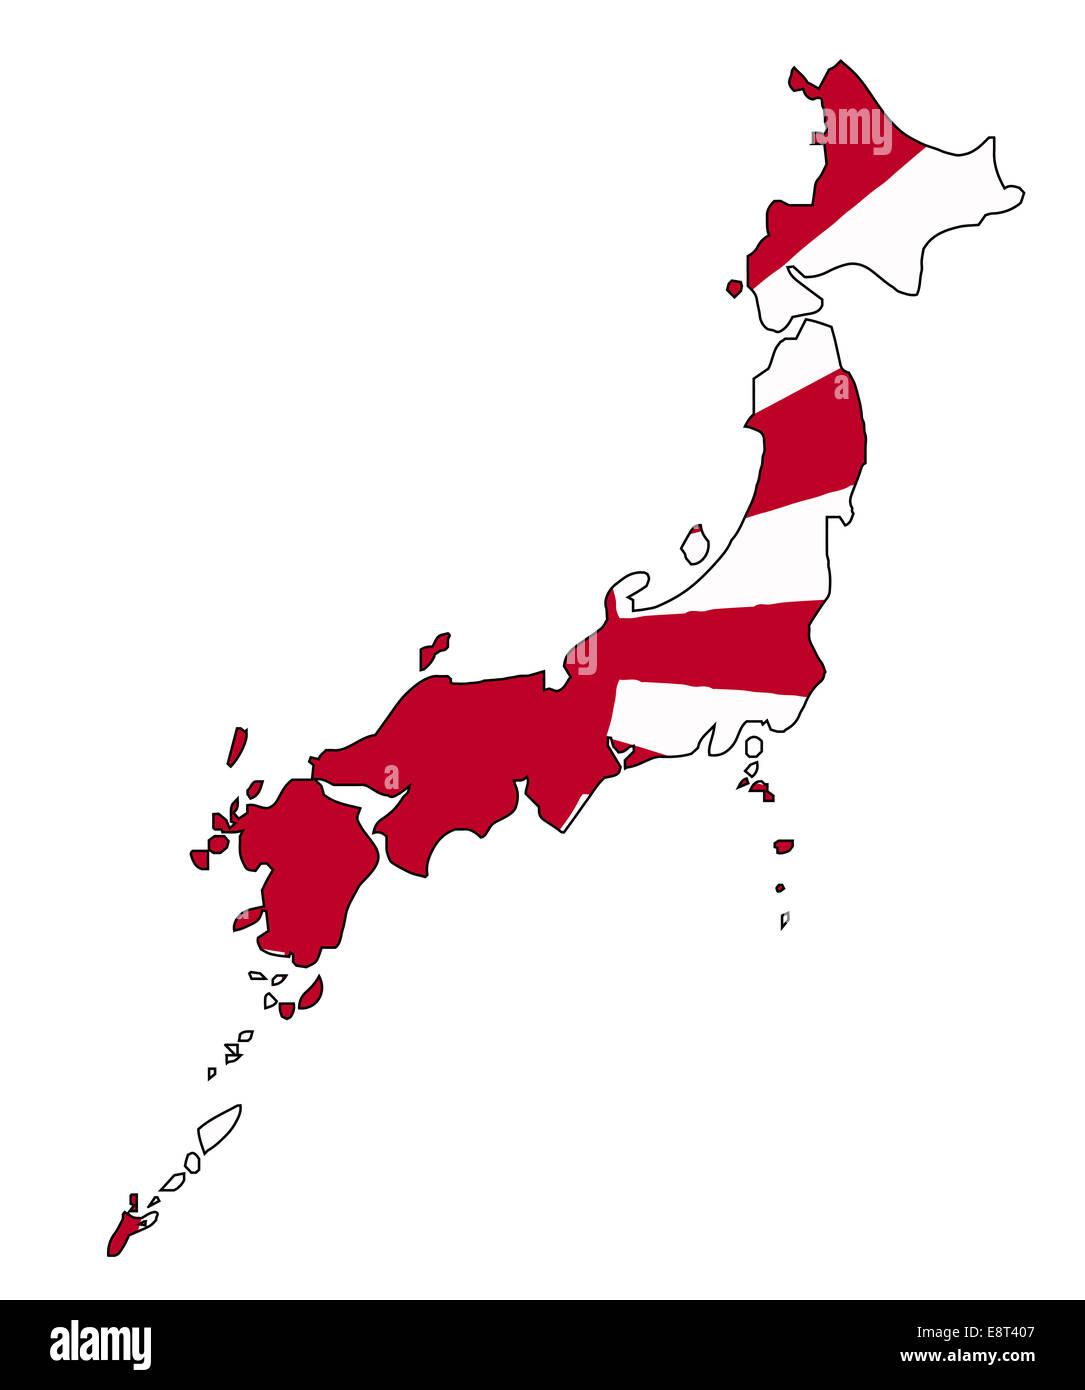 clipart map of japan - photo #18